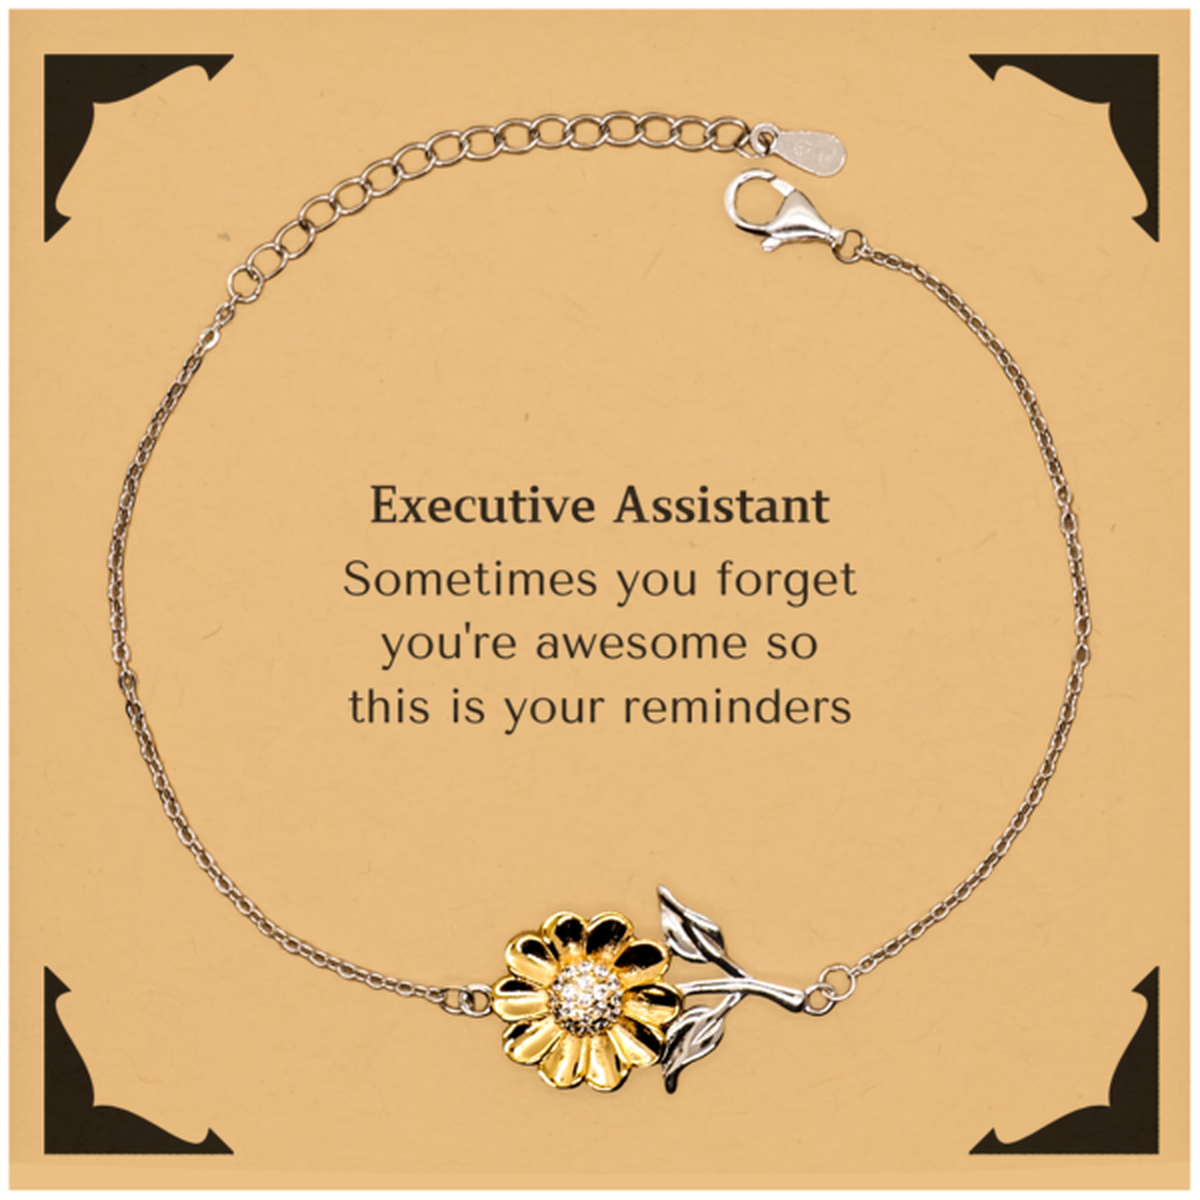 Sentimental Executive Assistant Sunflower Bracelet, Executive Assistant Sometimes you forget you're awesome so this is your reminders, Graduation Christmas Birthday Gifts for Executive Assistant, Men, Women, Coworkers